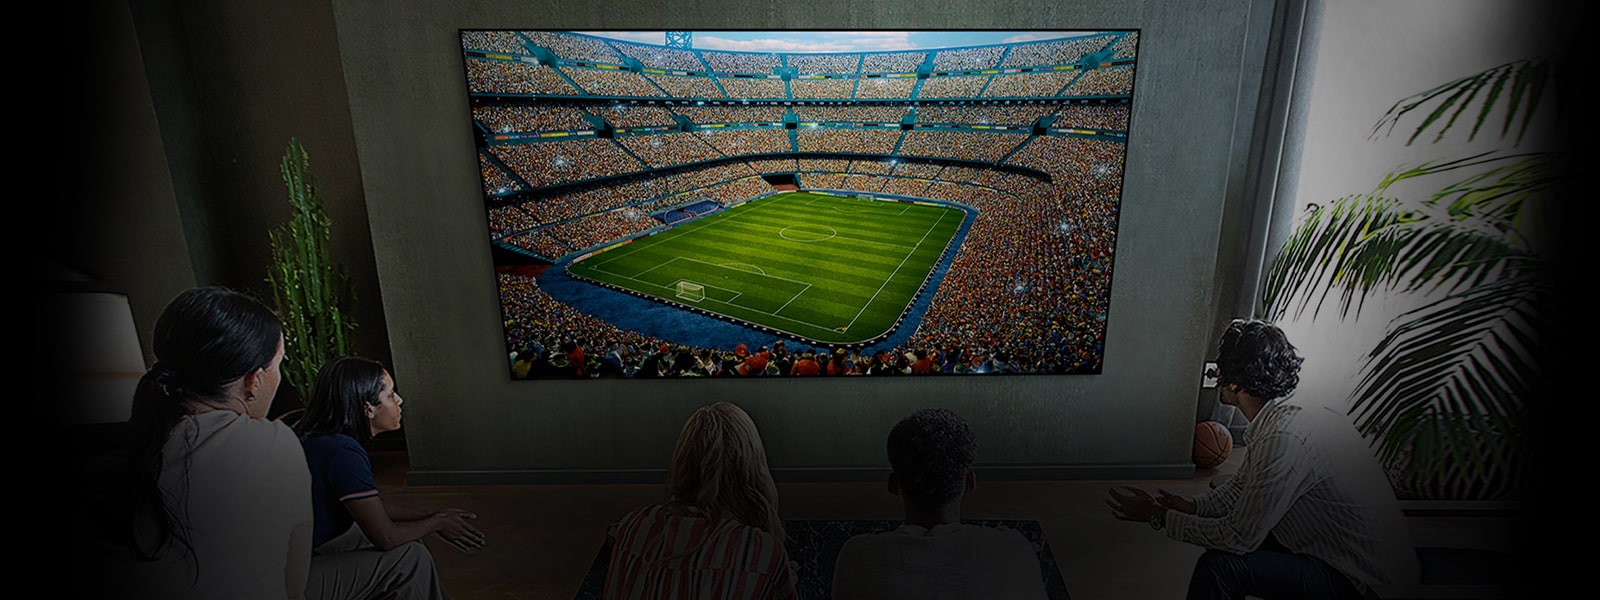 People watching a soccer game on a large TV screen in the living room